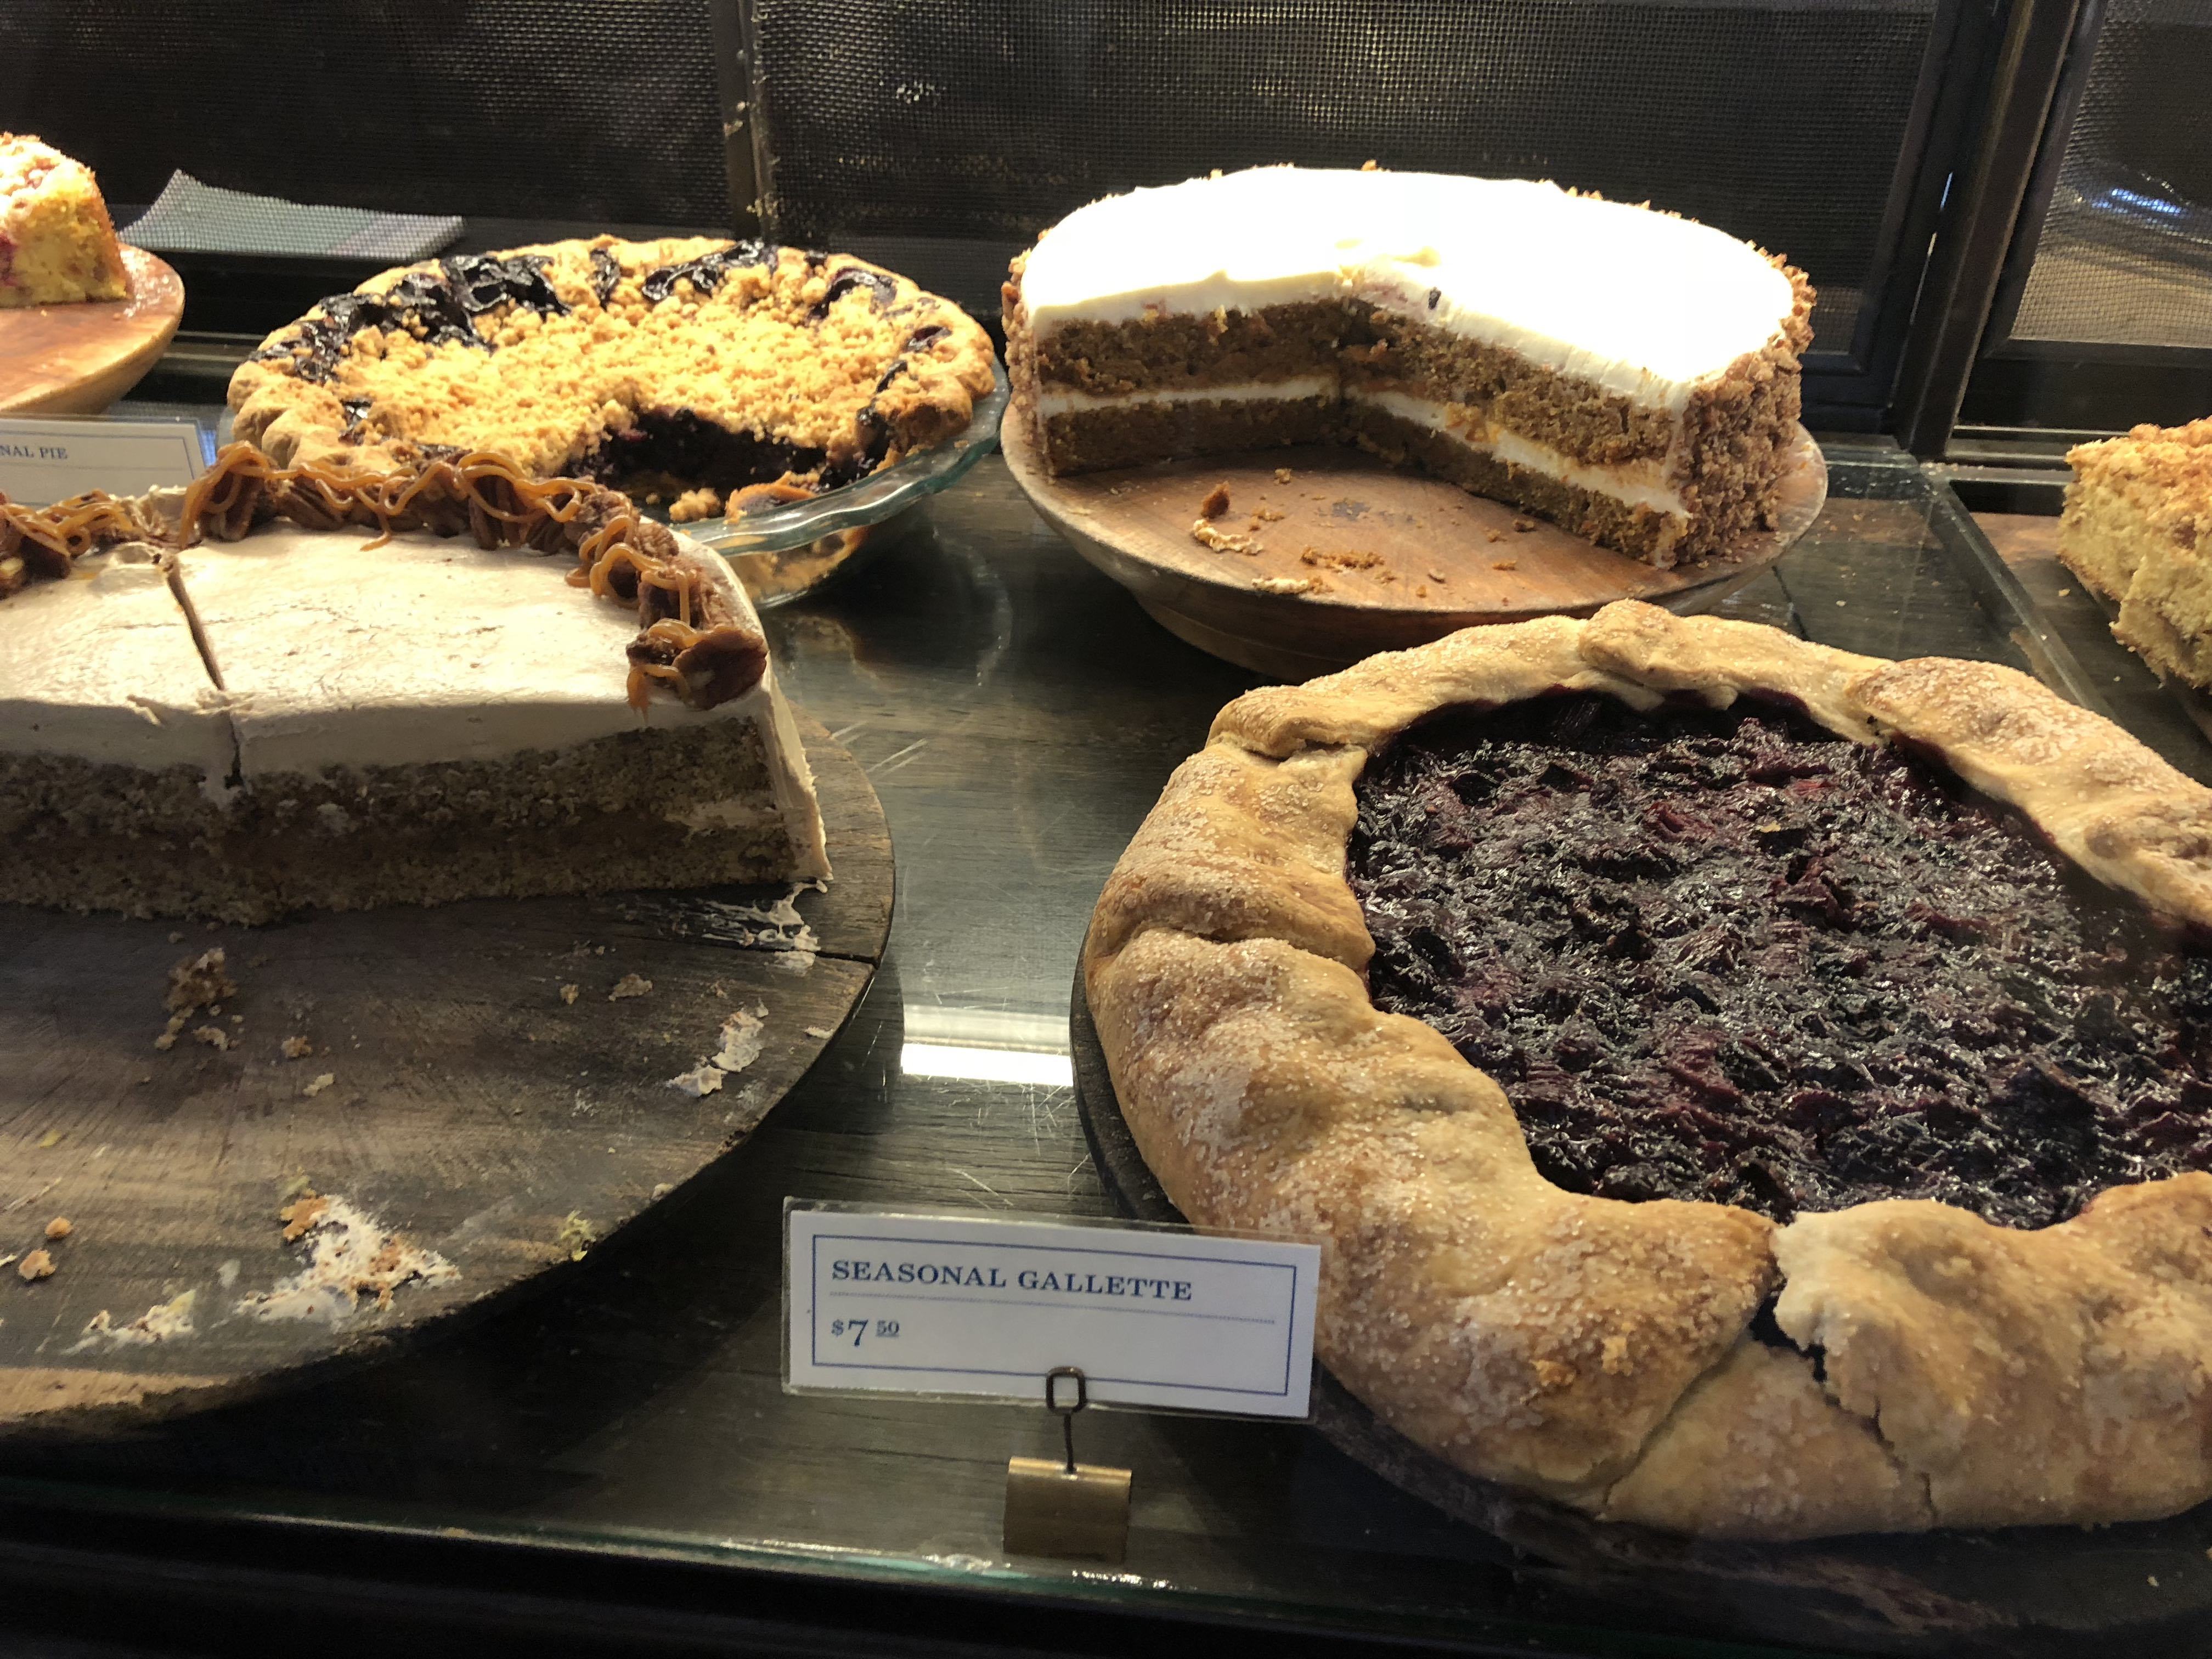 Galette cakes and pies in the window